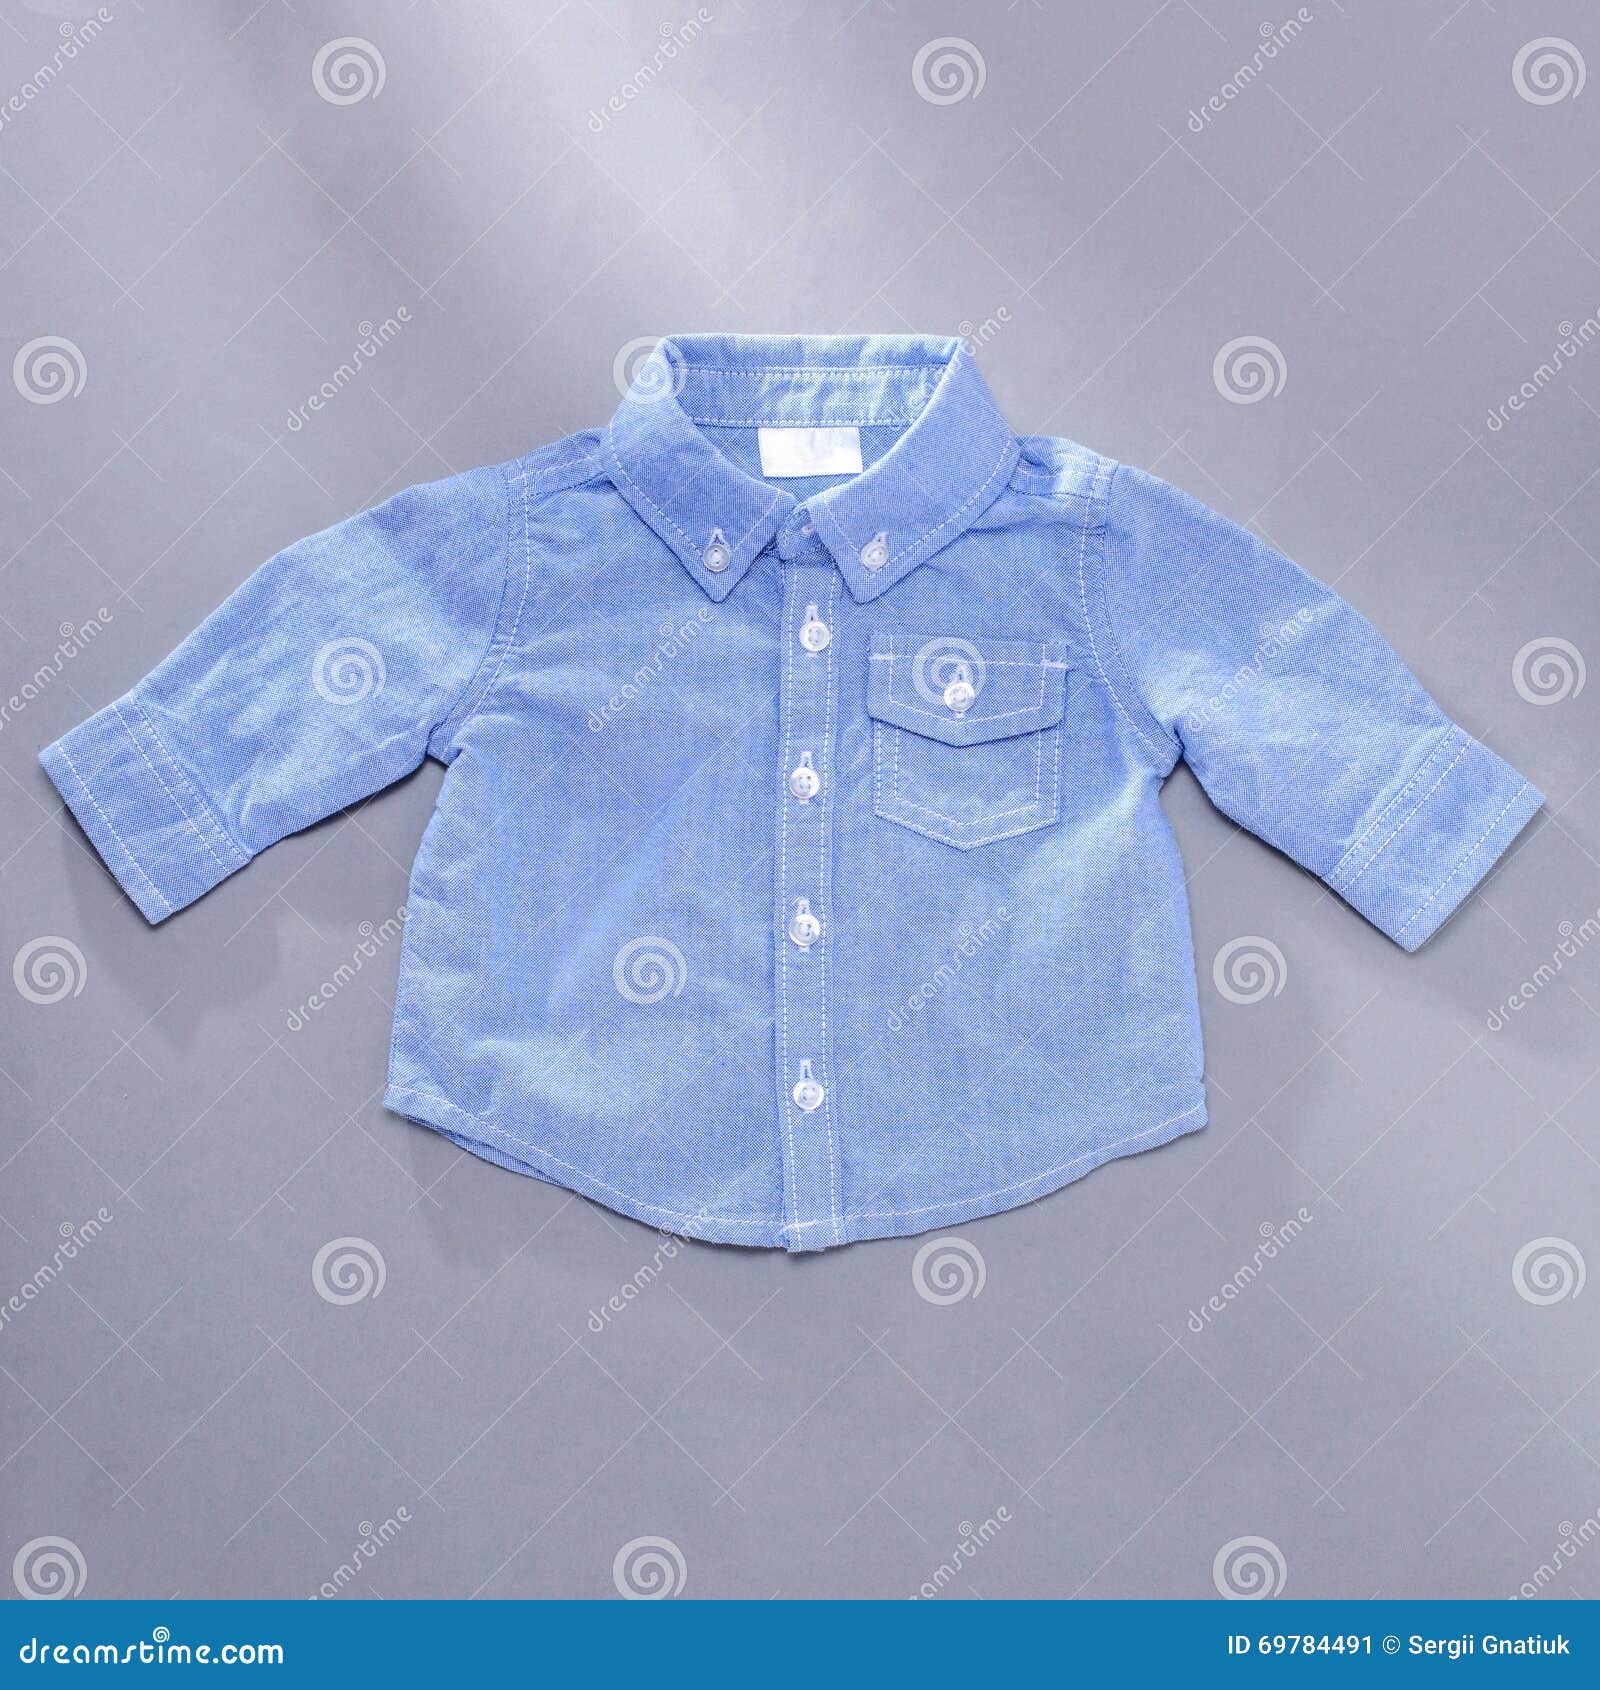 Little Blue Infant Buttoned Long Sleeve Shirt Stock Image - Image of ...